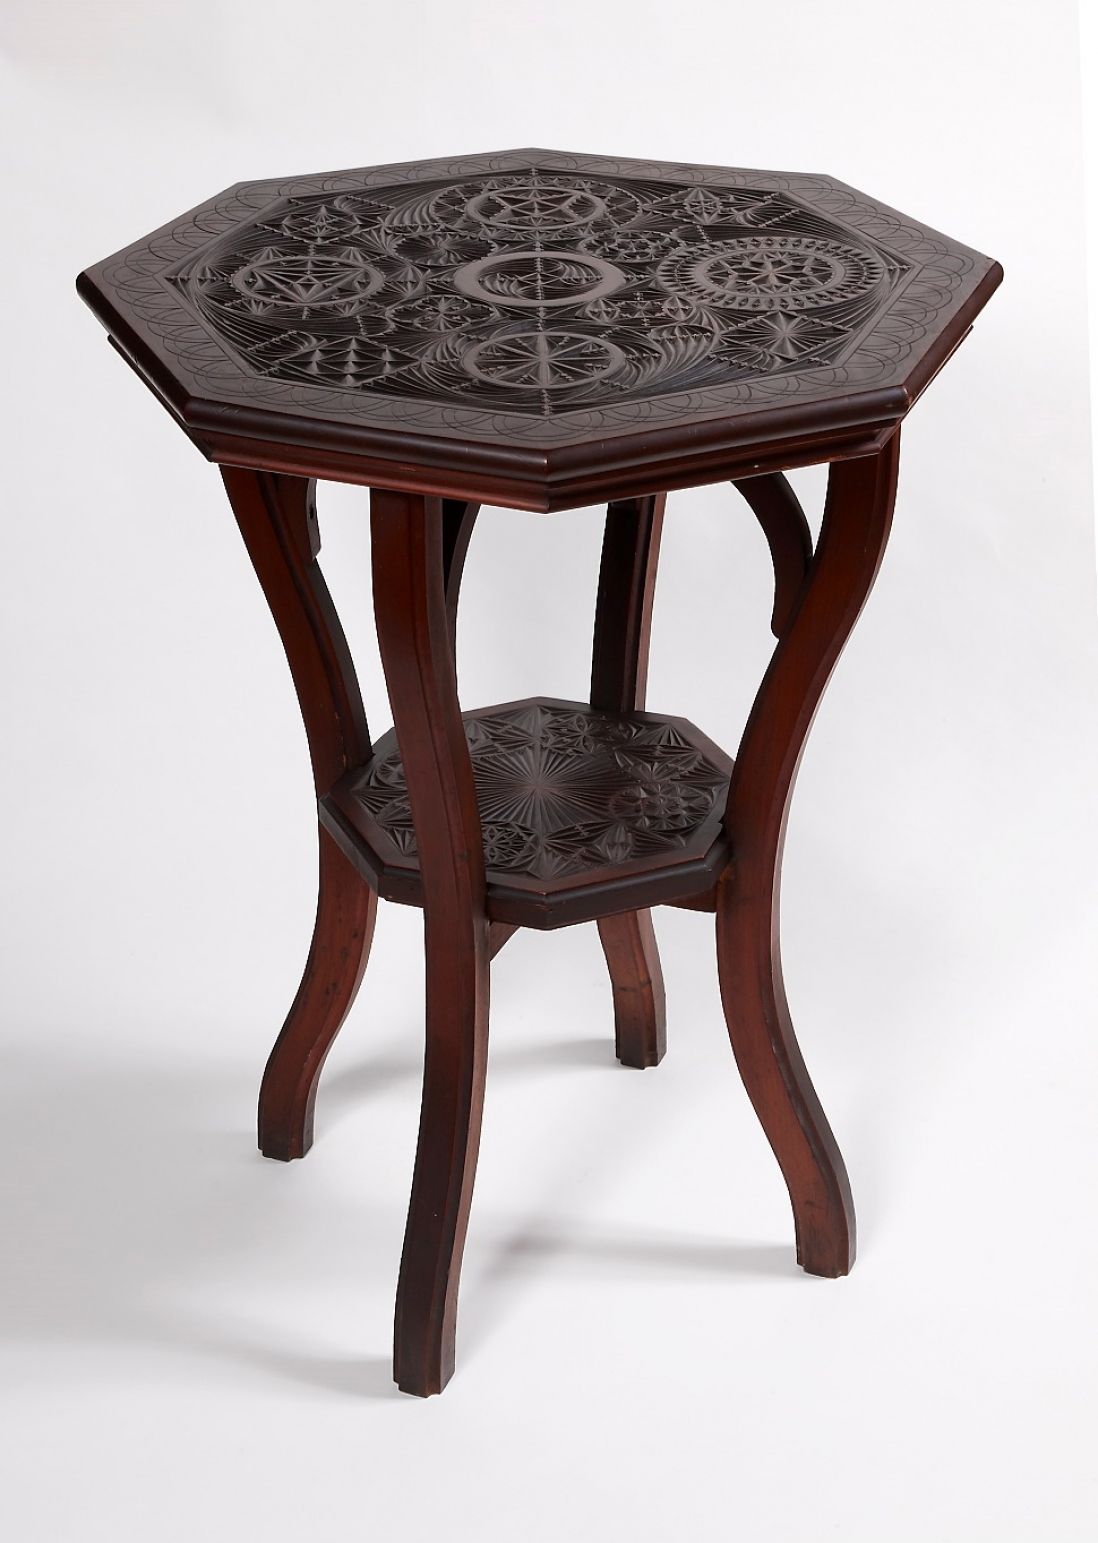  Chip-carved table  A demountable, chip-carved occasional table of kauri pine, made by carpenter George Stevenson Liggins (1874 -1907), Melbourne, c1902. 80(h) x 59(w) x 59cm(d).  Timbers chosen for chip-carving in Australia were typically softwoods such as pine, maple or cedar. In this example, the table tops are constructed from Kauri Pine, along with the two larger supports, while the two smaller supports (not visible in this photo) are constructed from Queensland Maple and were probably added at a later date to stem warping of the larger top.  